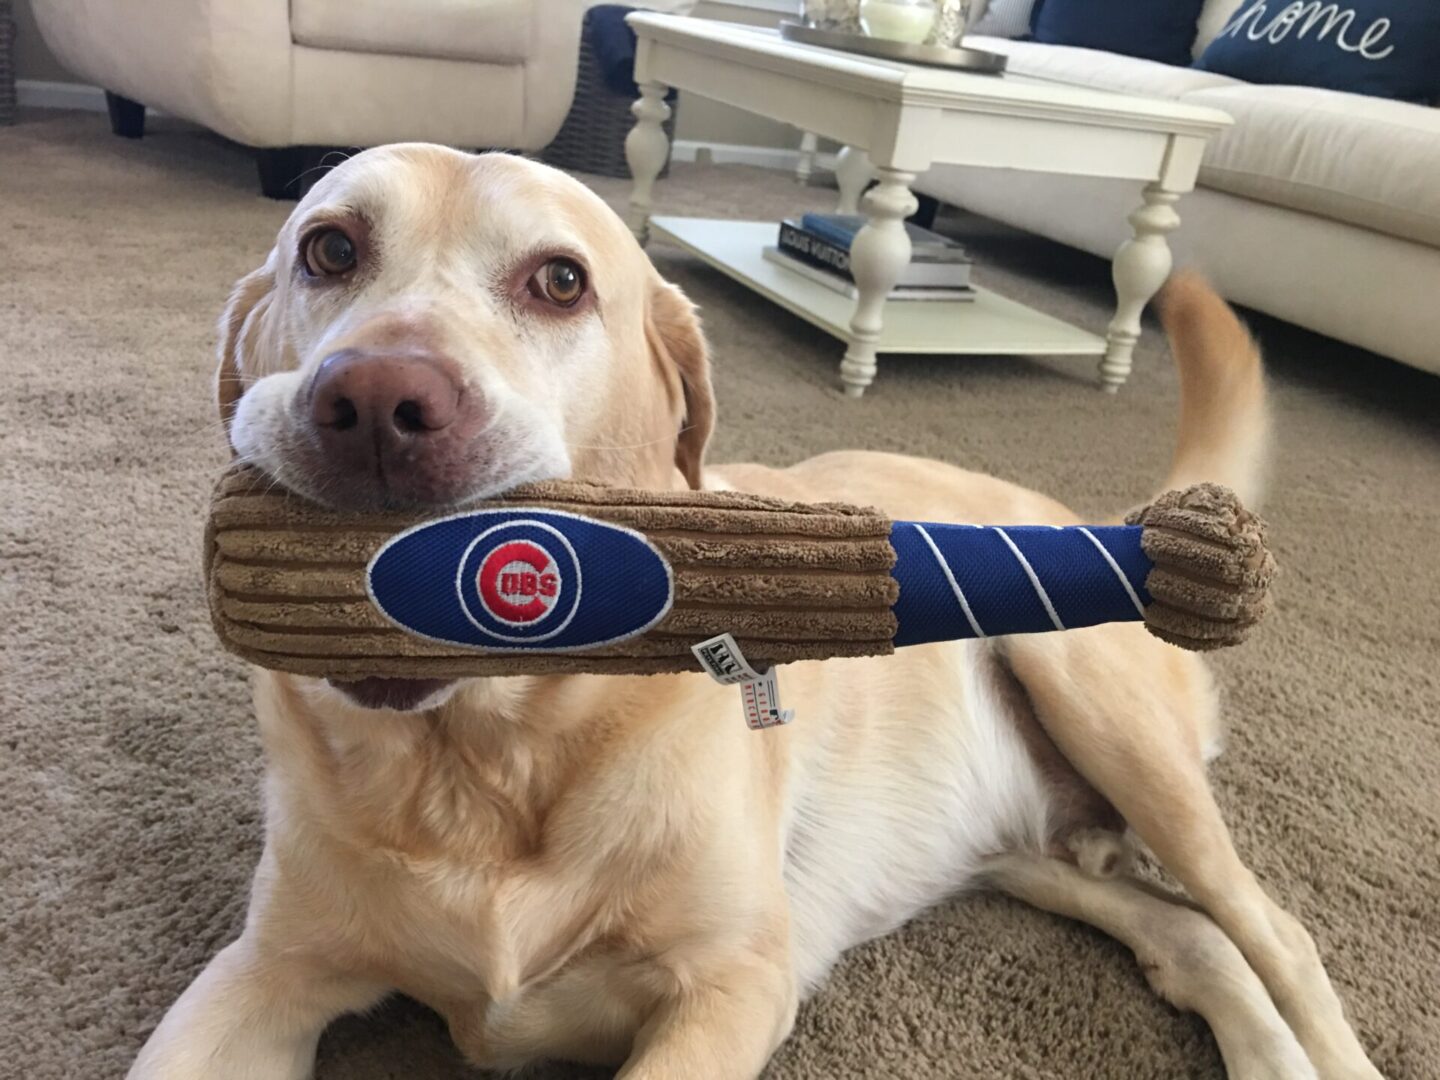 A dog is holding a baseball bat in its mouth.